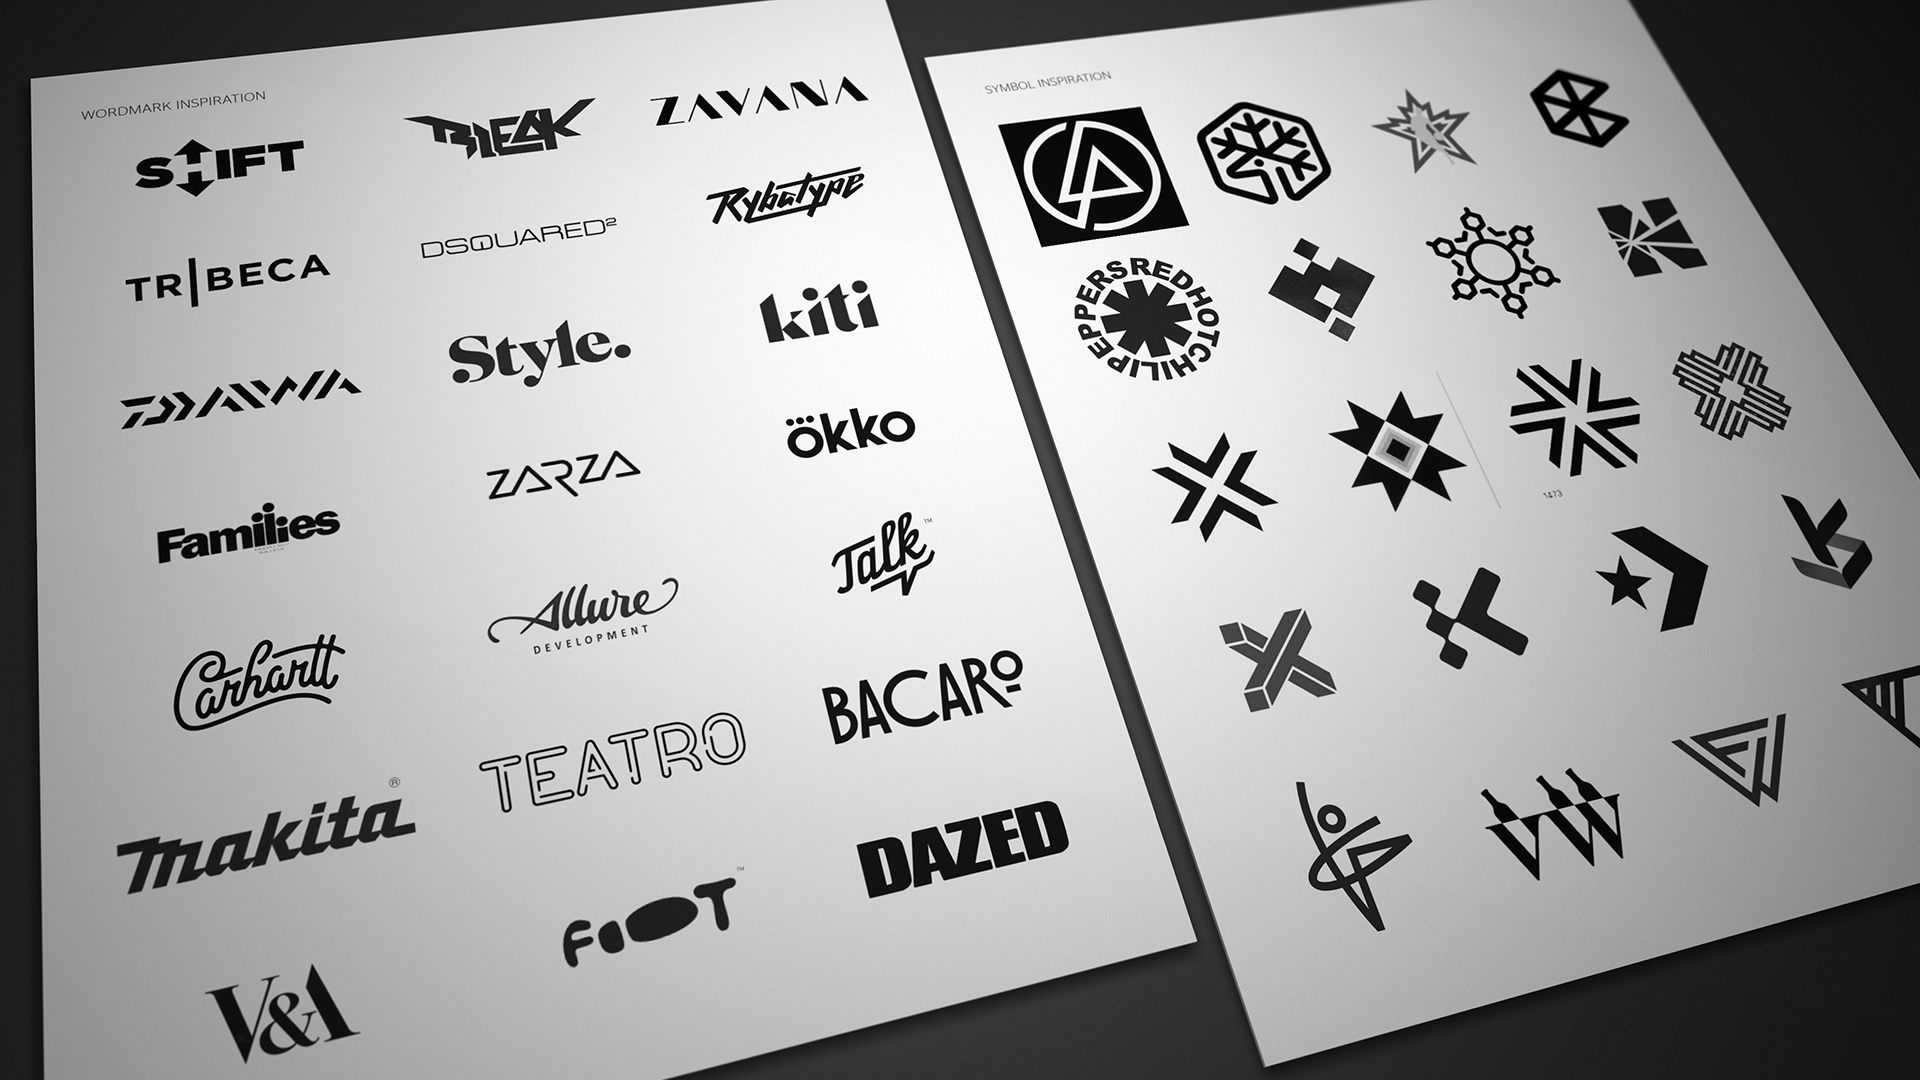 We researched simple flat brands for inspiration.